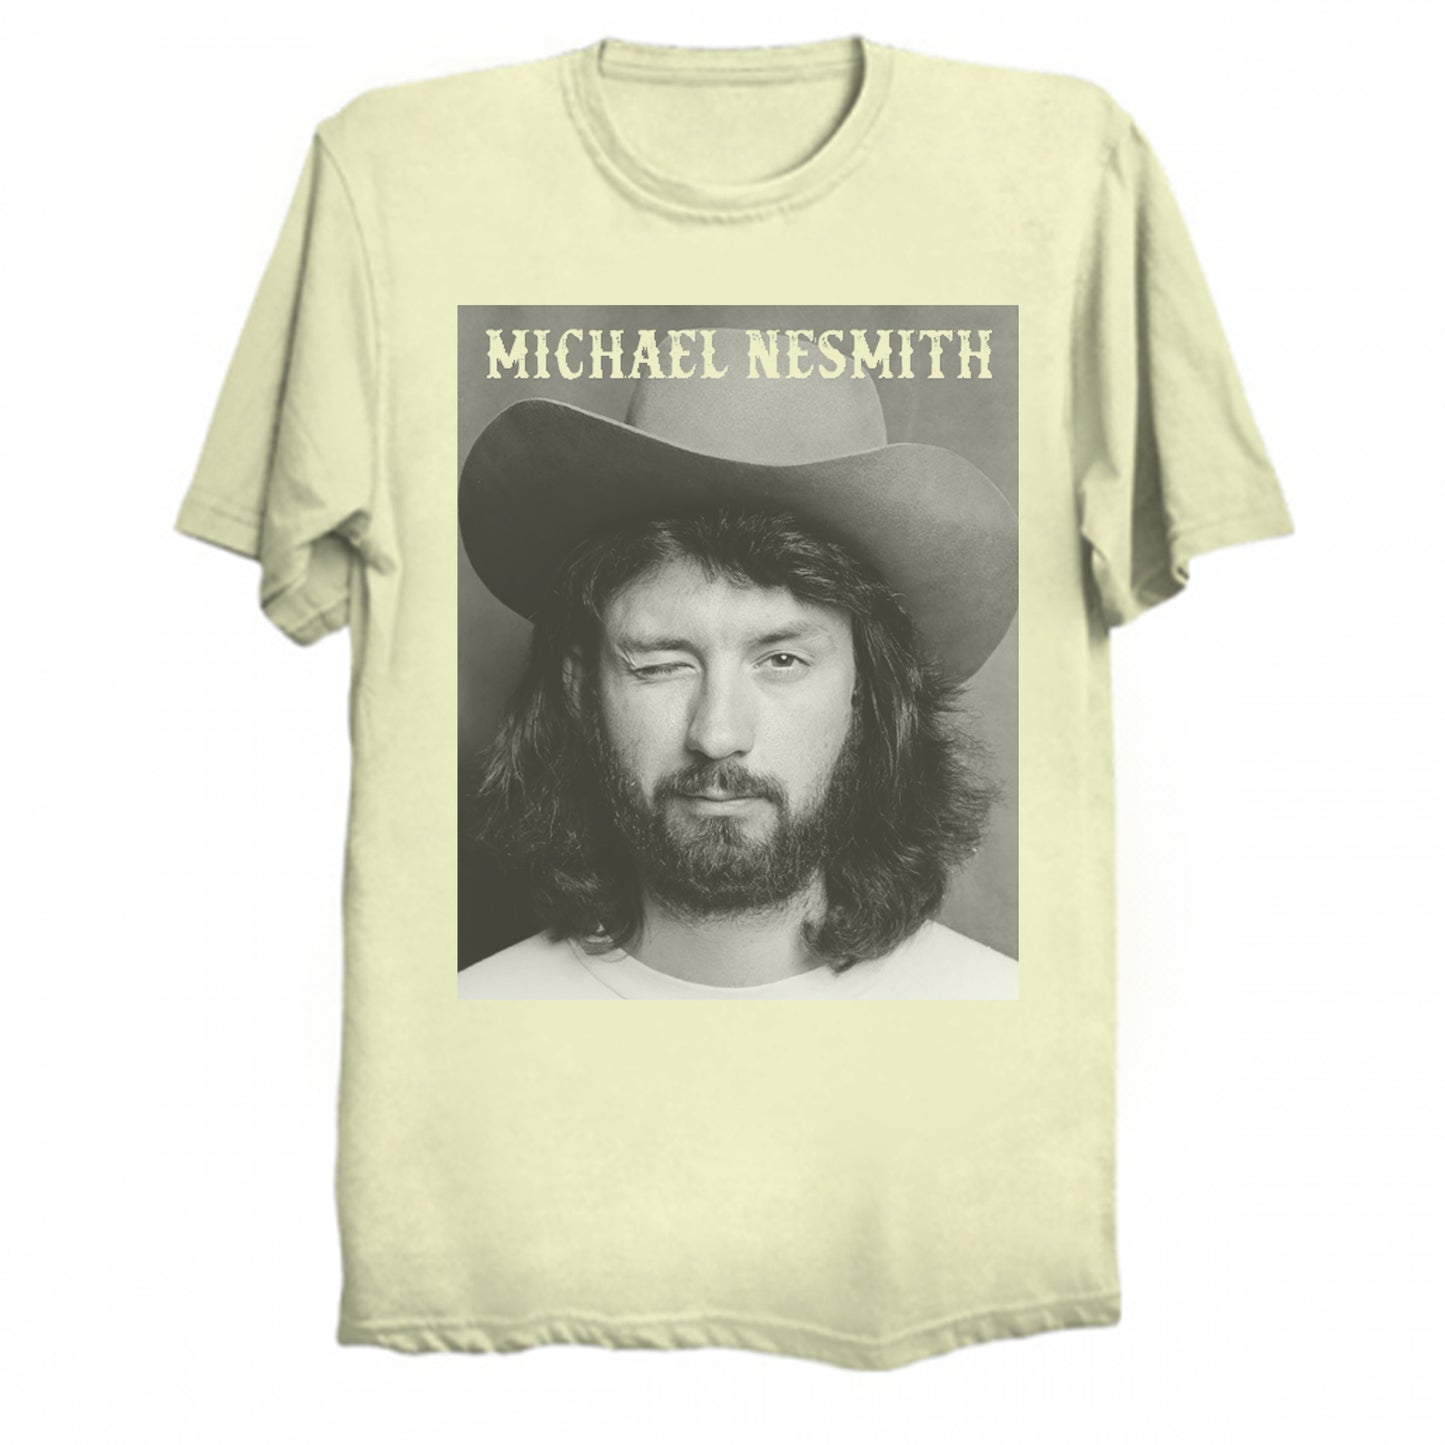 Mike Nesmith - King Monkee T-Shirt